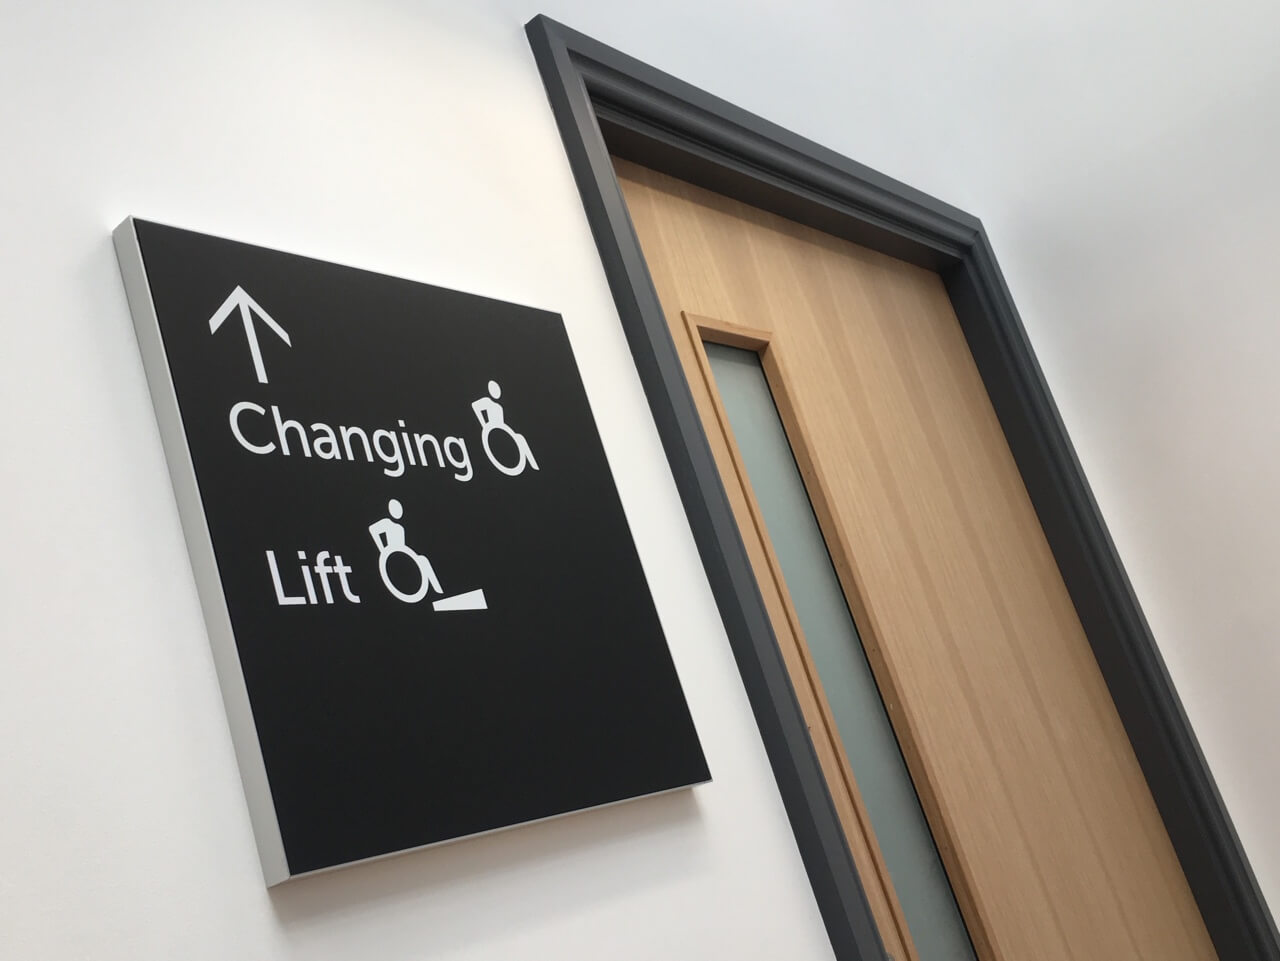 A wayfinding sign highlighting the direction to changing rooms and a lift for wheelchair access